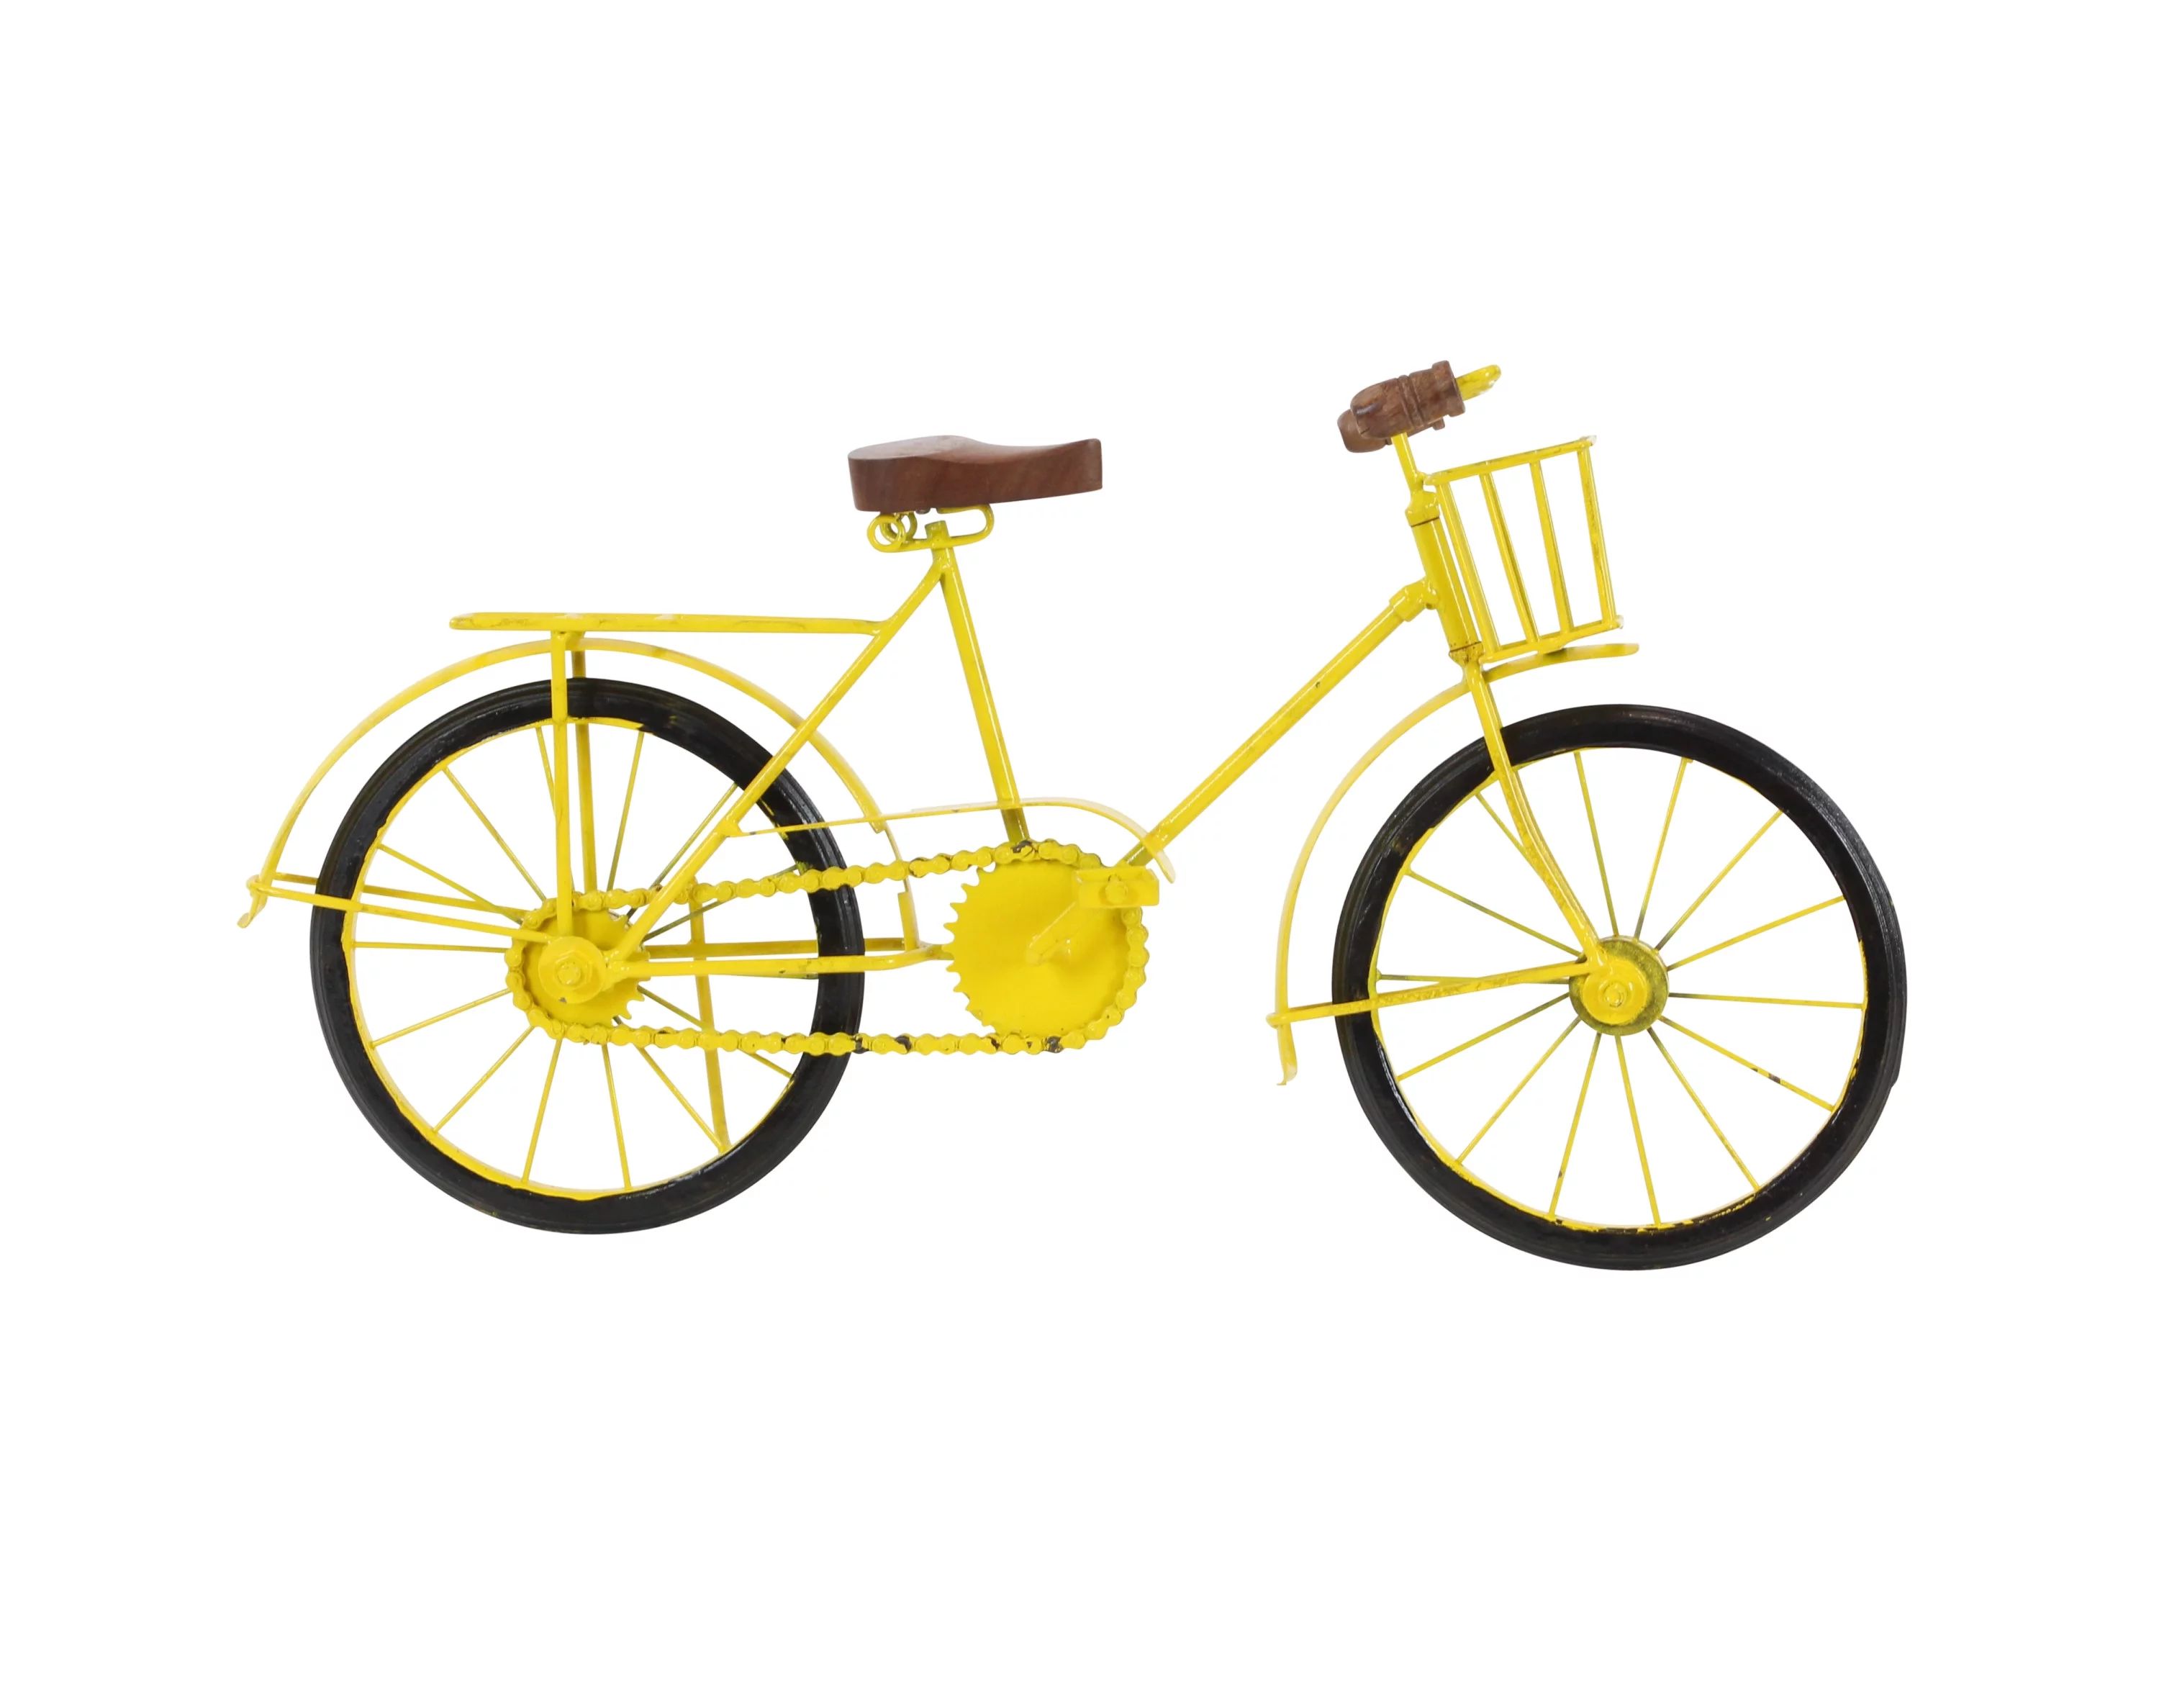 19" x 10" Yellow Metal Bike Sculpture with Wood Accents, by DecMode | Walmart (US)